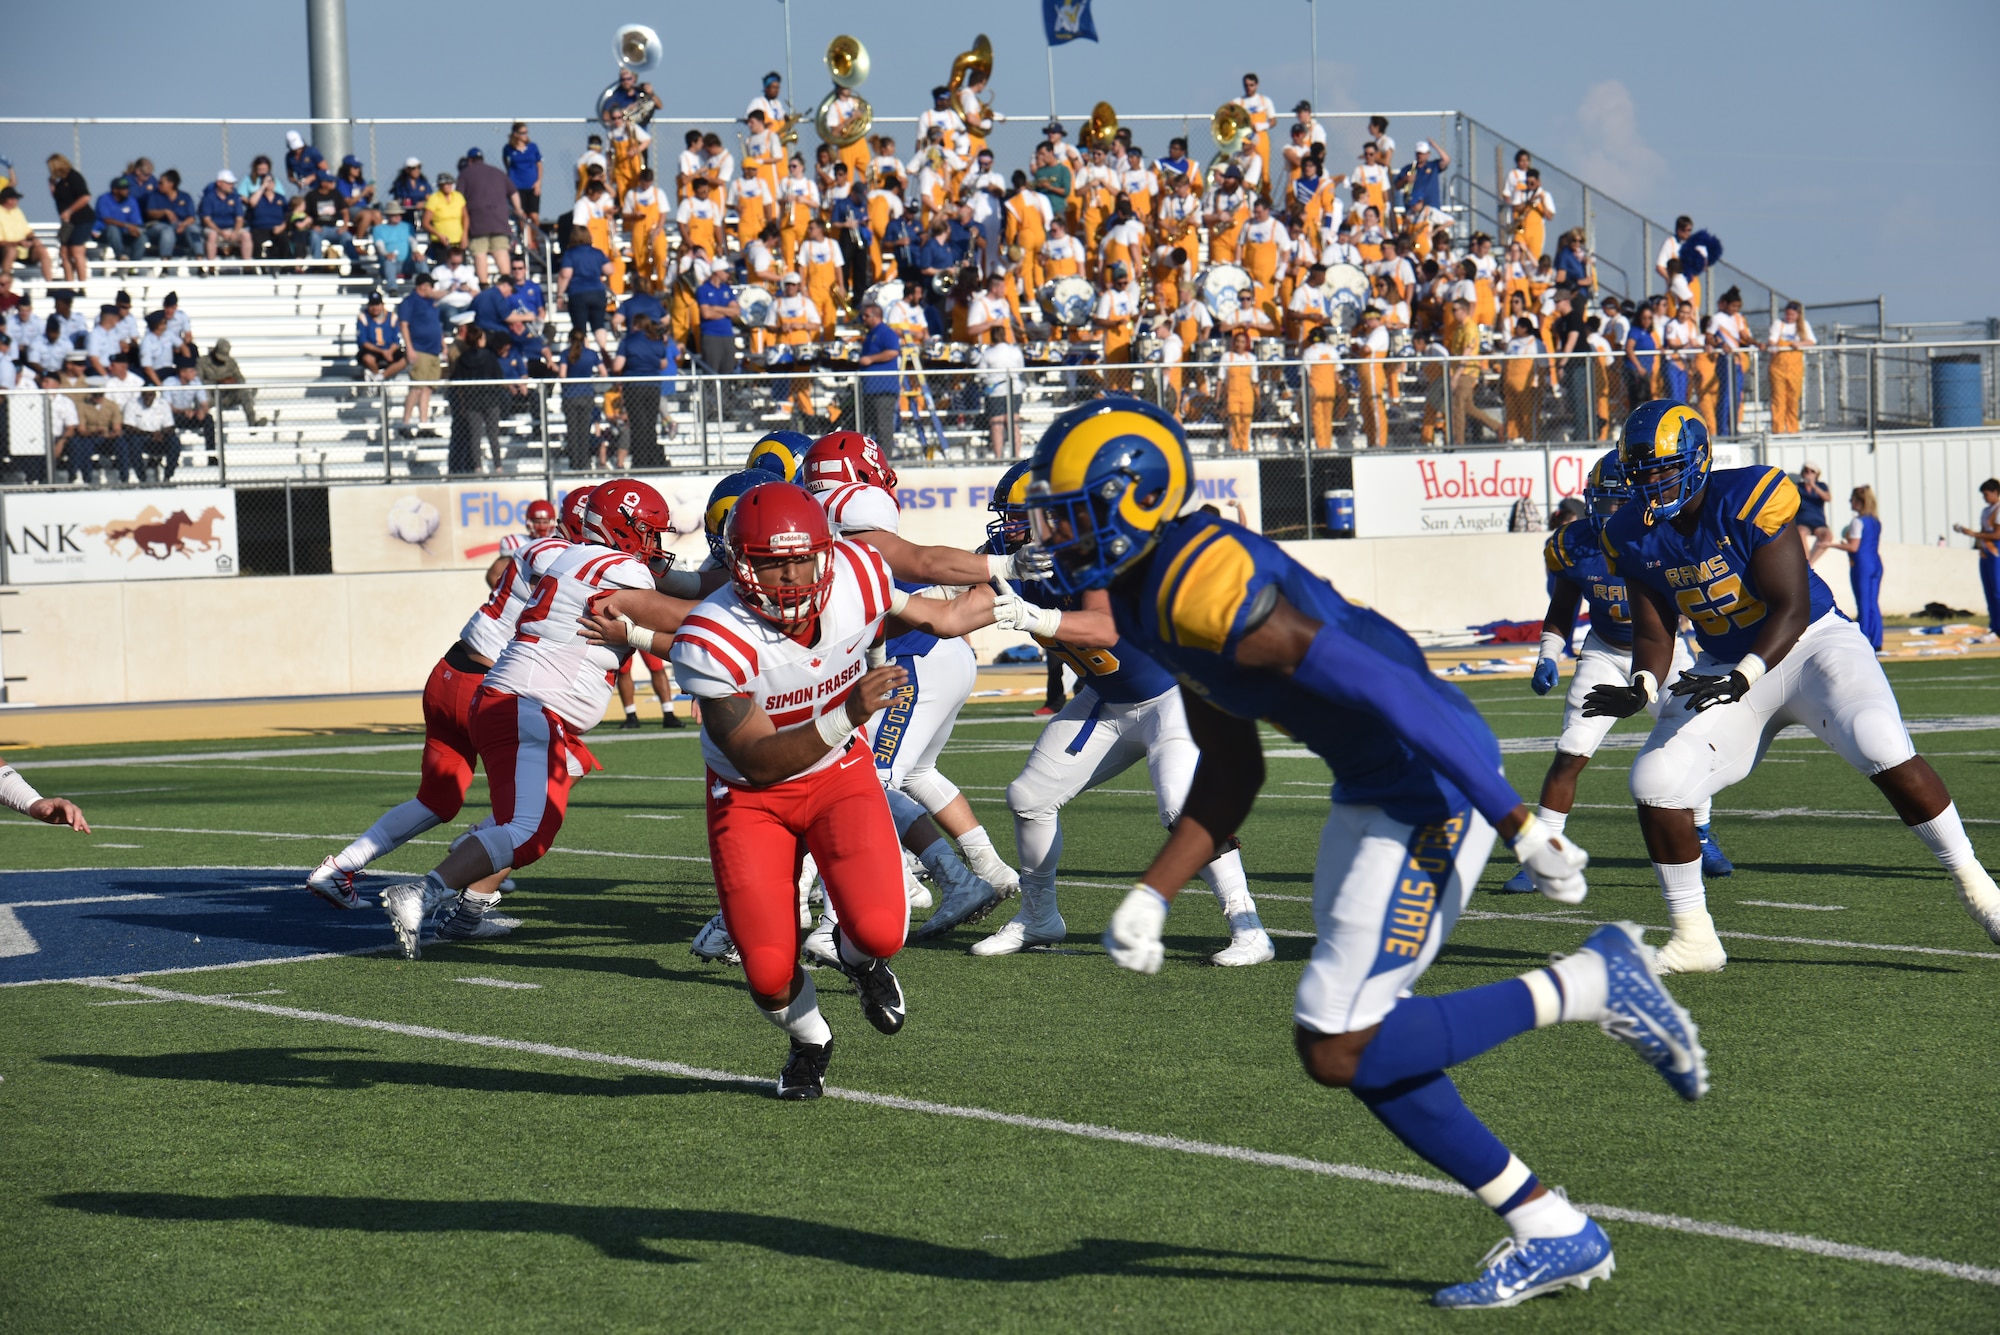 Angelo State University Rams and Simon Fraser University players compete during the ASU military appreciation night at 1st Community Credit Union Field, San Angelo, Texas, Sept. 14, 2019. ASU hosted SFU, a Canadian football team and won the game 68-7. (U.S. Air Force photo by Senior Airman Seraiah Wolf/Released)